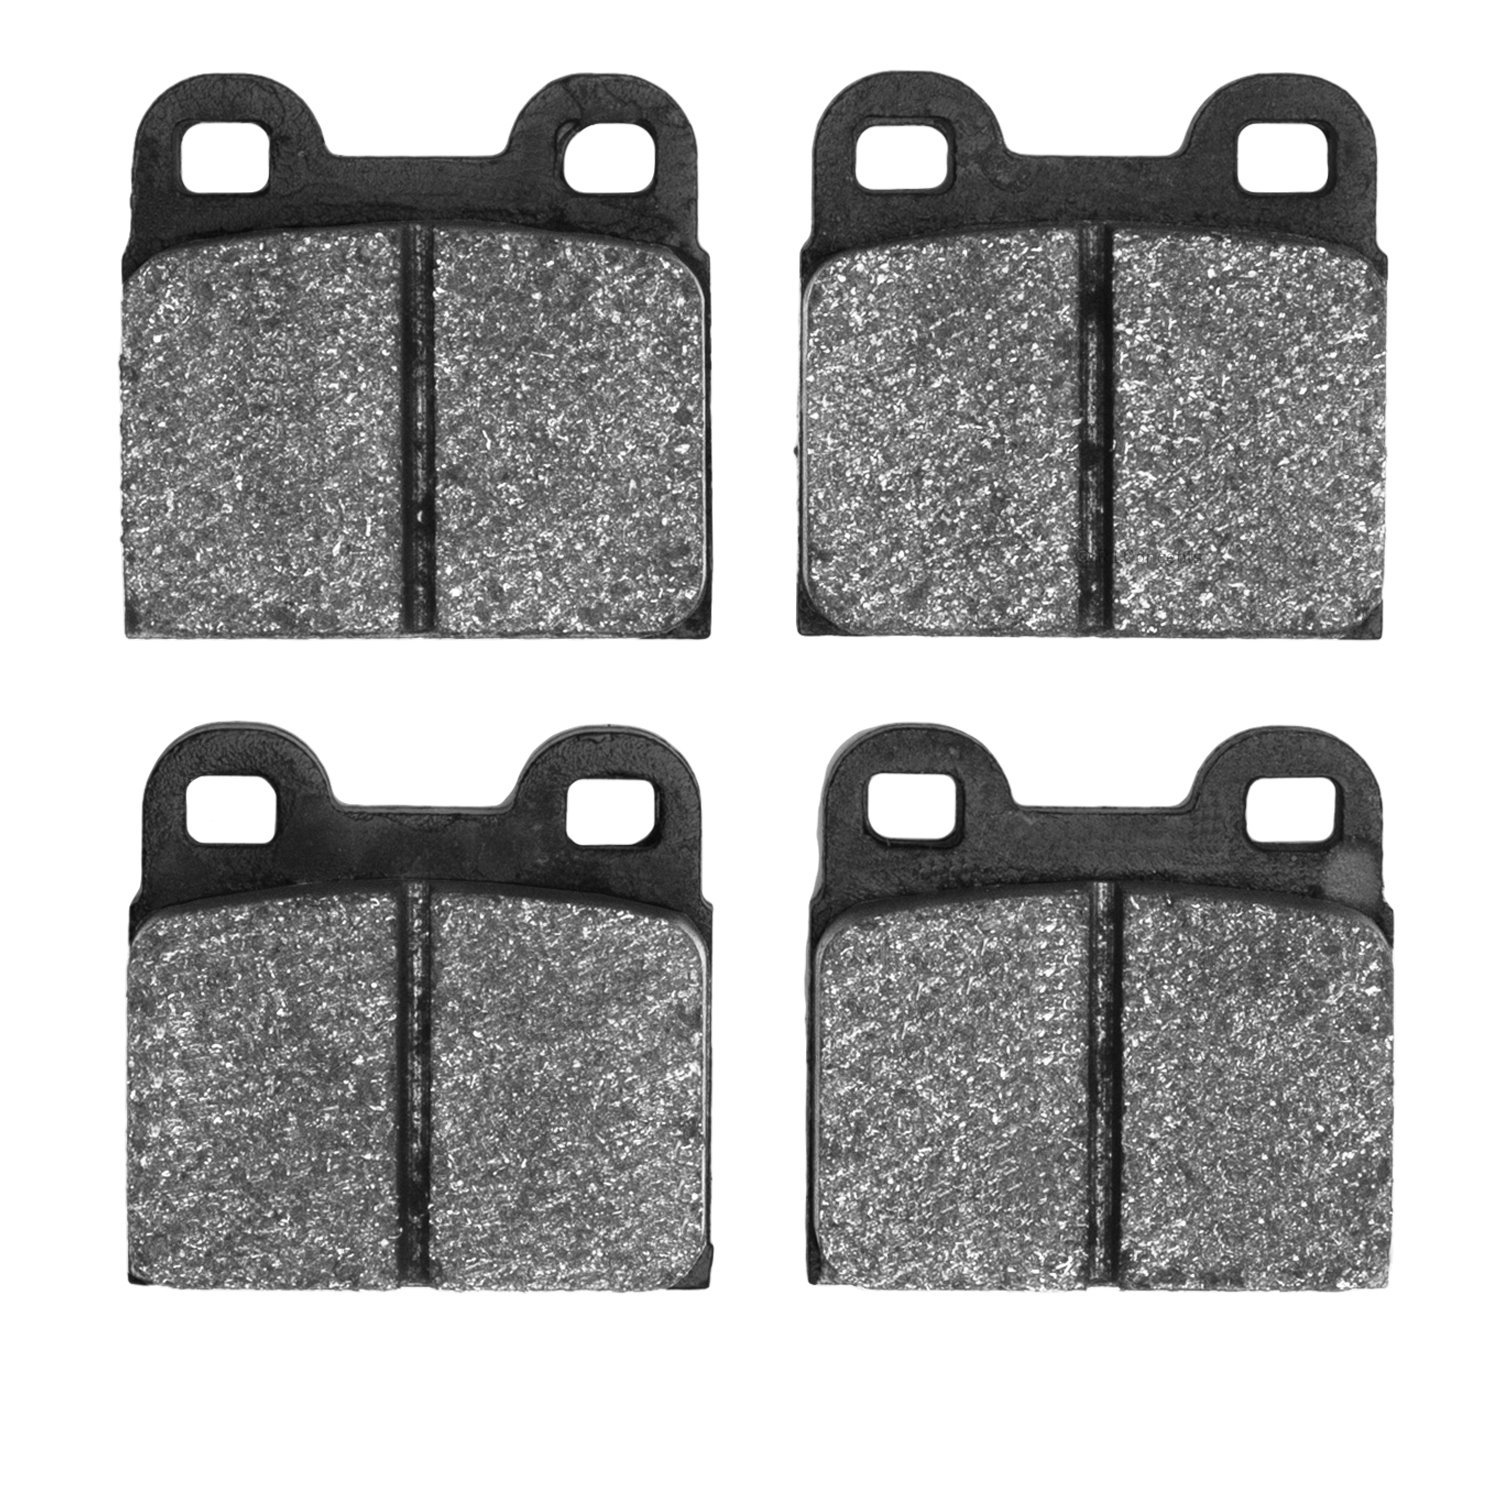 1551-0030-00 5000 Advanced Low-Metallic Brake Pads, 1963-1987 Multiple Makes/Models, Position: Front,Rear